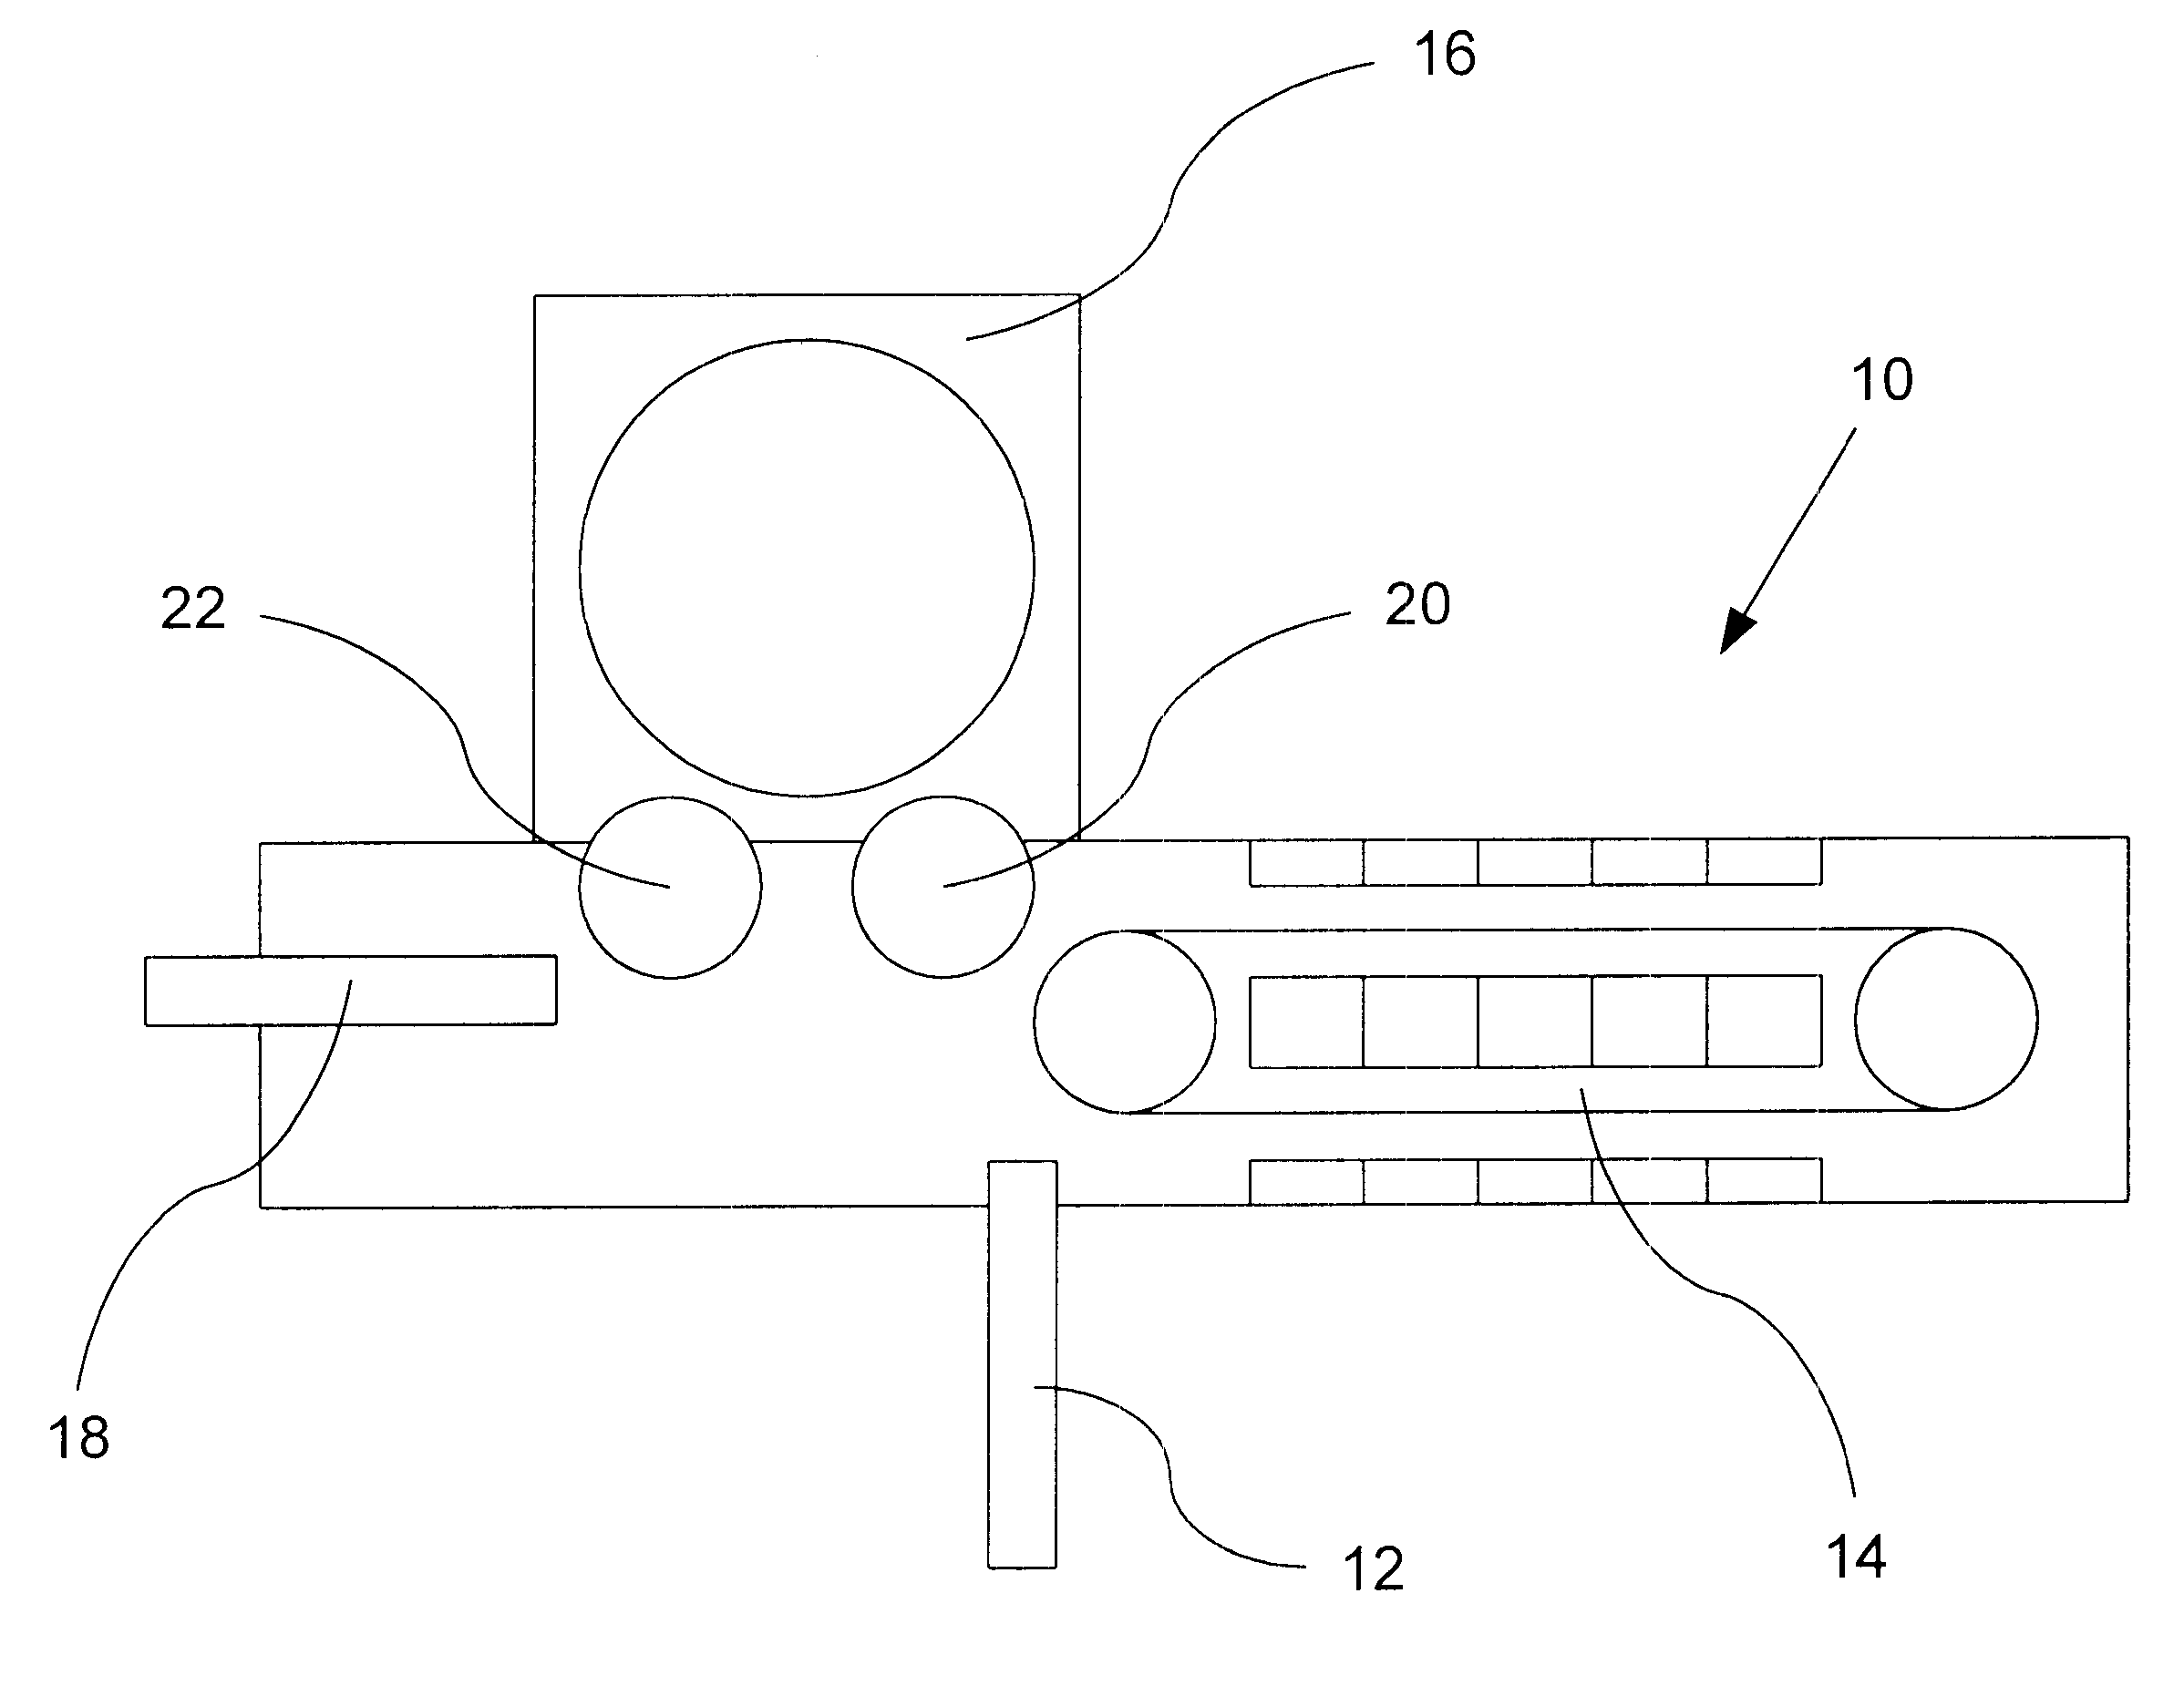 Method for making a carbonated soft drink bottle with an internal web and hand-grip feature